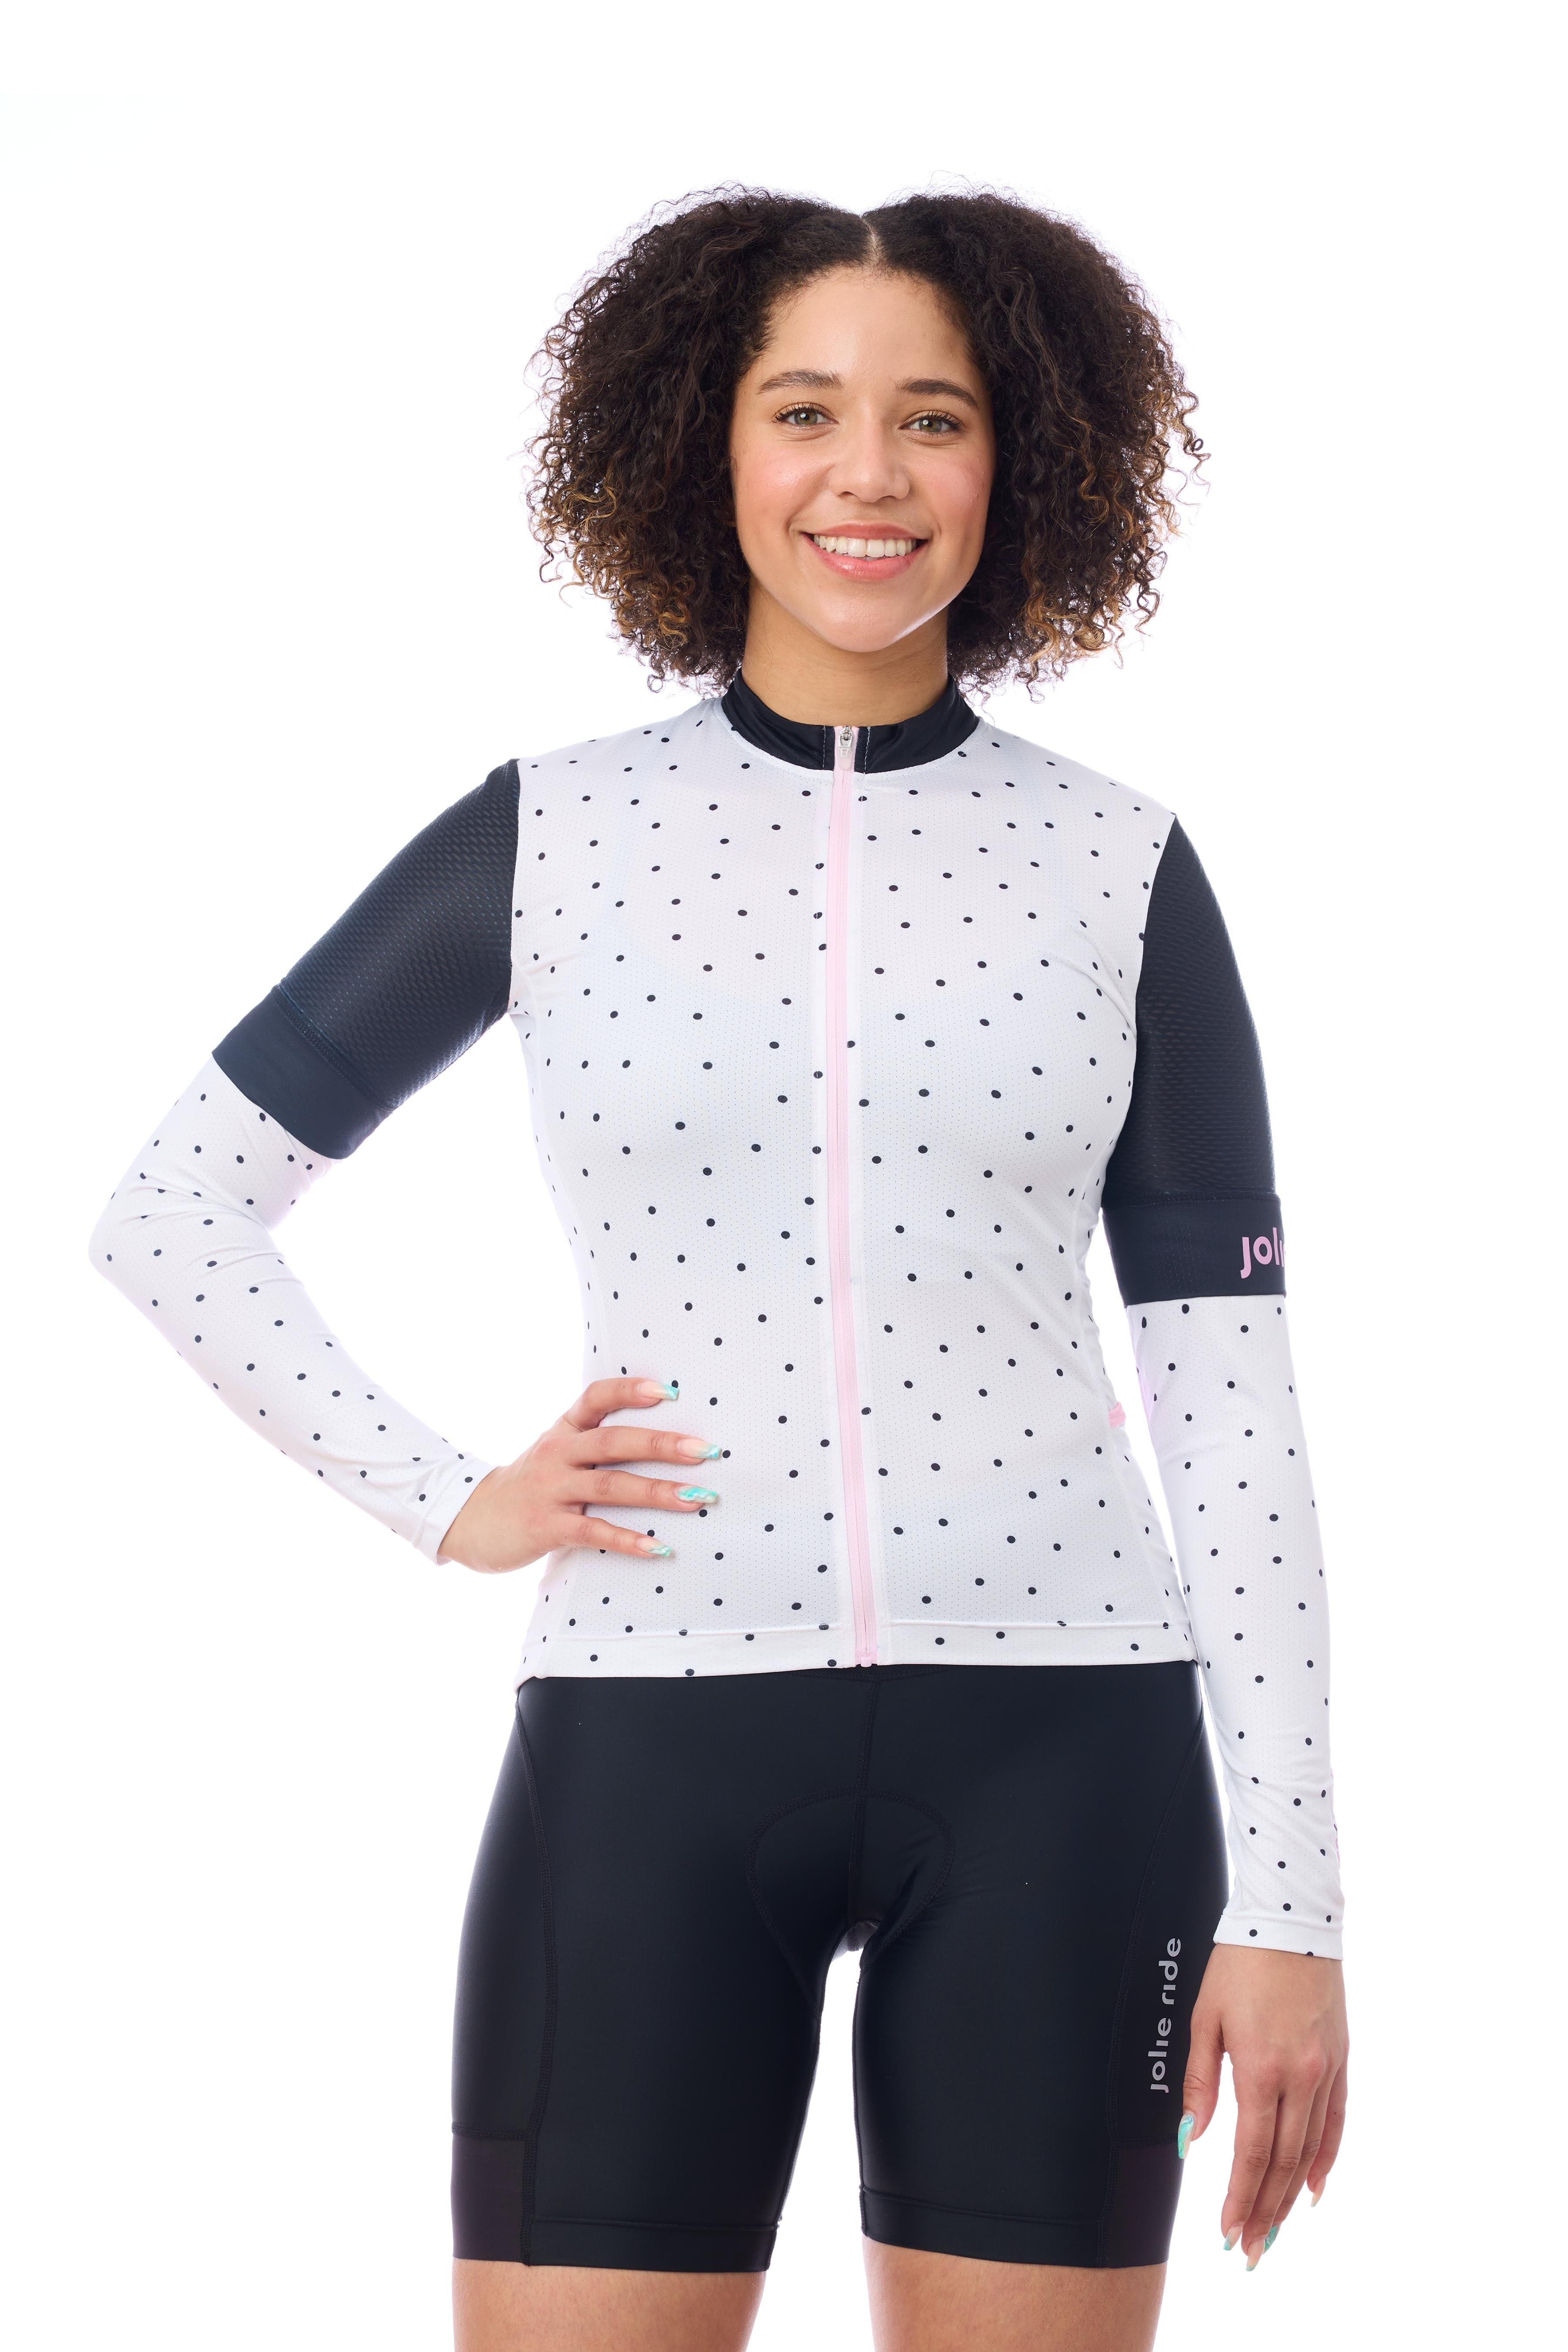 JolieRide Jersey women's cycling jersey with UV protection, breathability, and storage